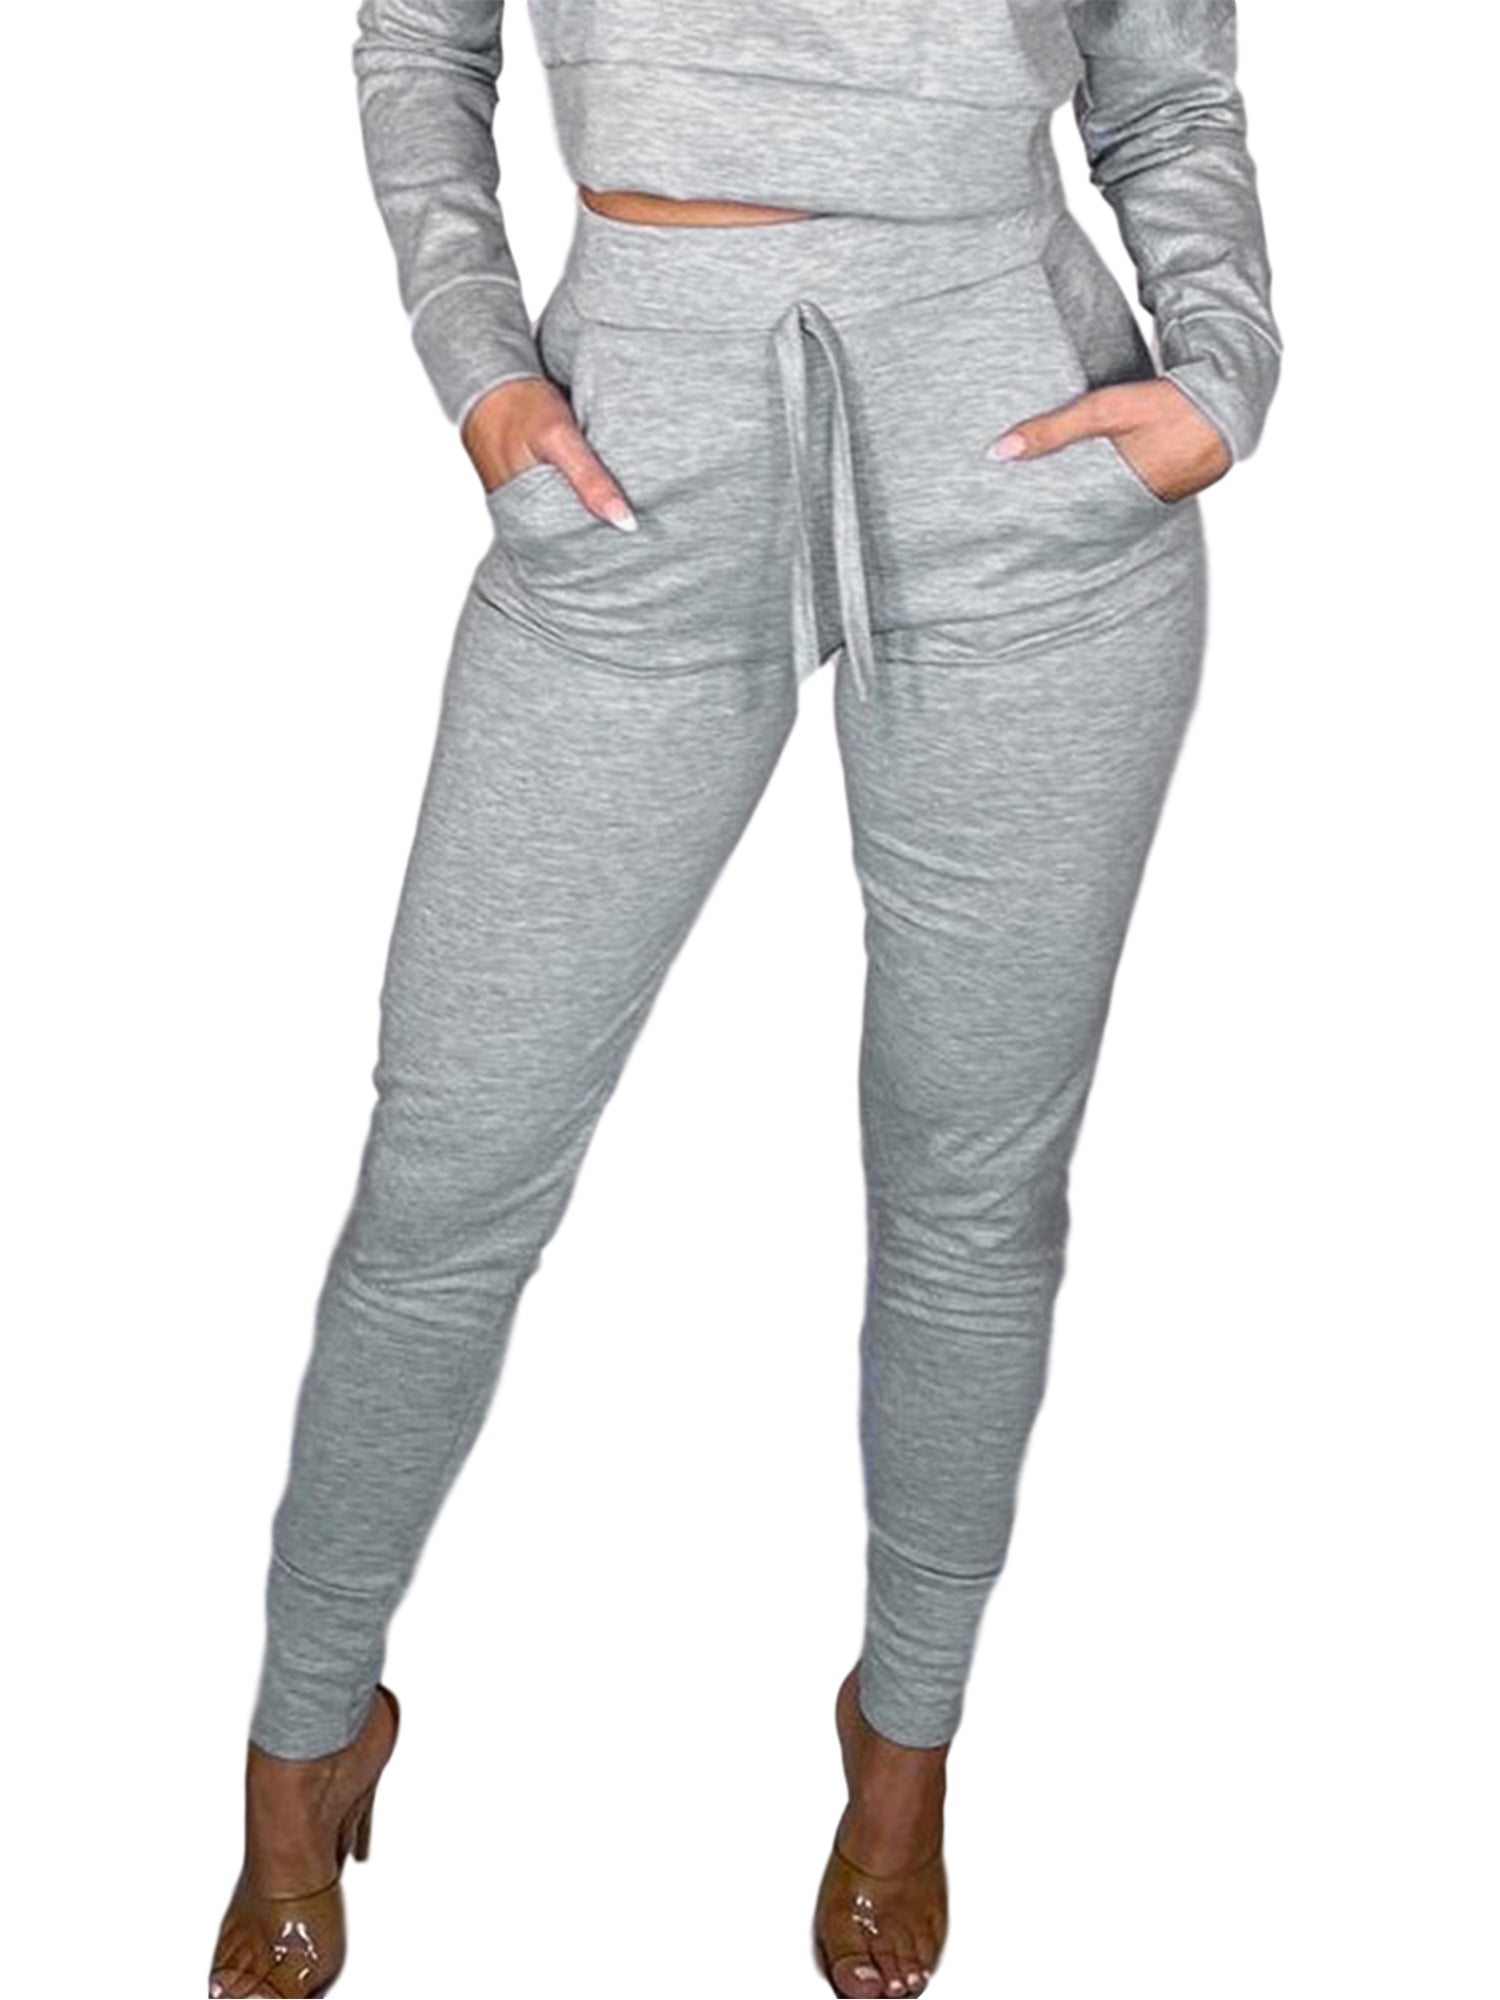 MERSARIPHY Women Jogger Casual Elastic Waist Ankle Cuff Tight Sweatpants 